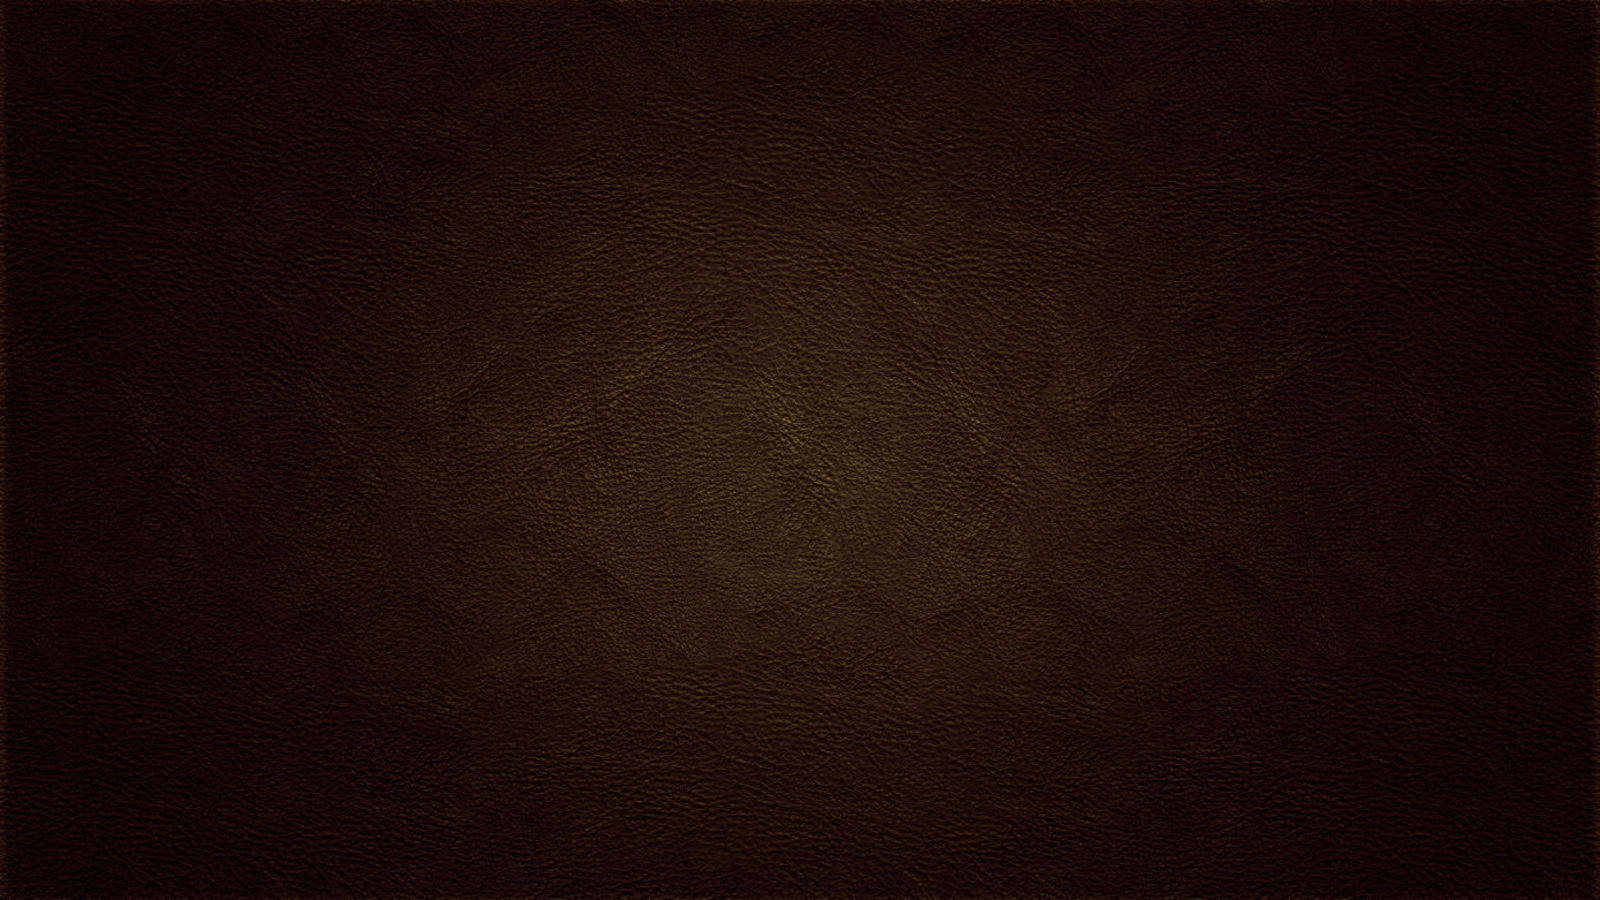 abstract brown leather background